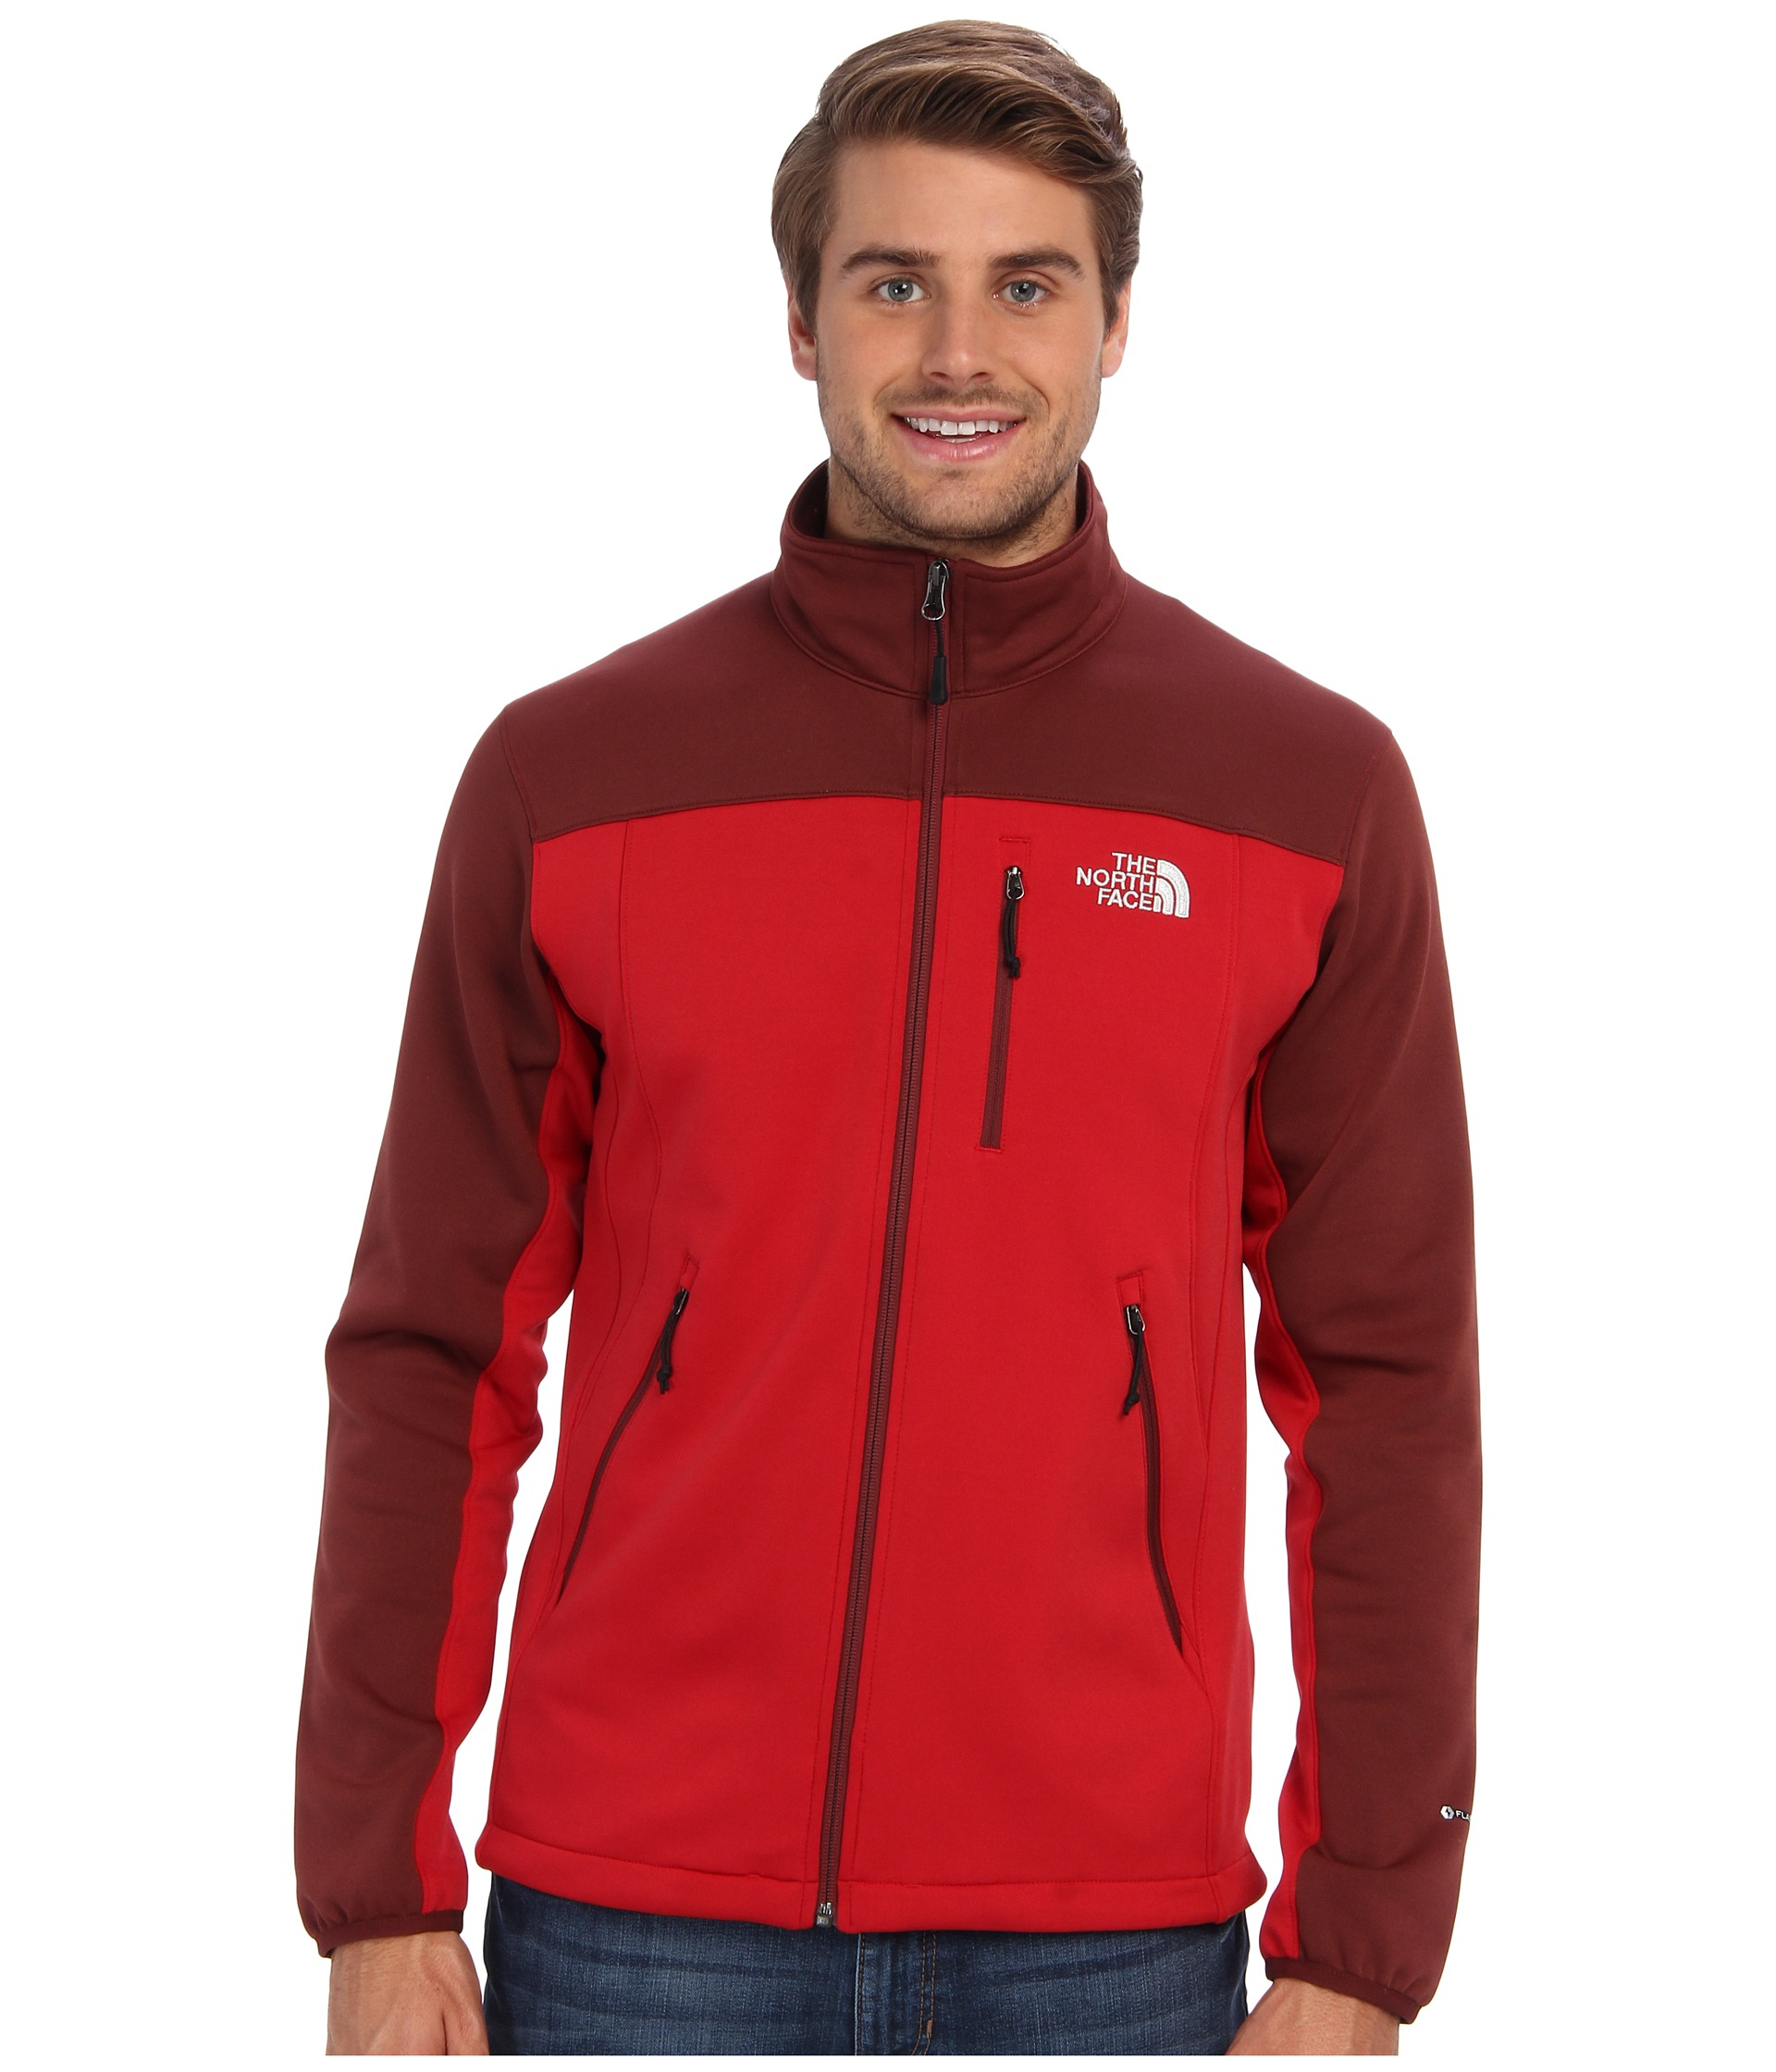 Lyst - The North Face Momentum Jacket in Red for Men